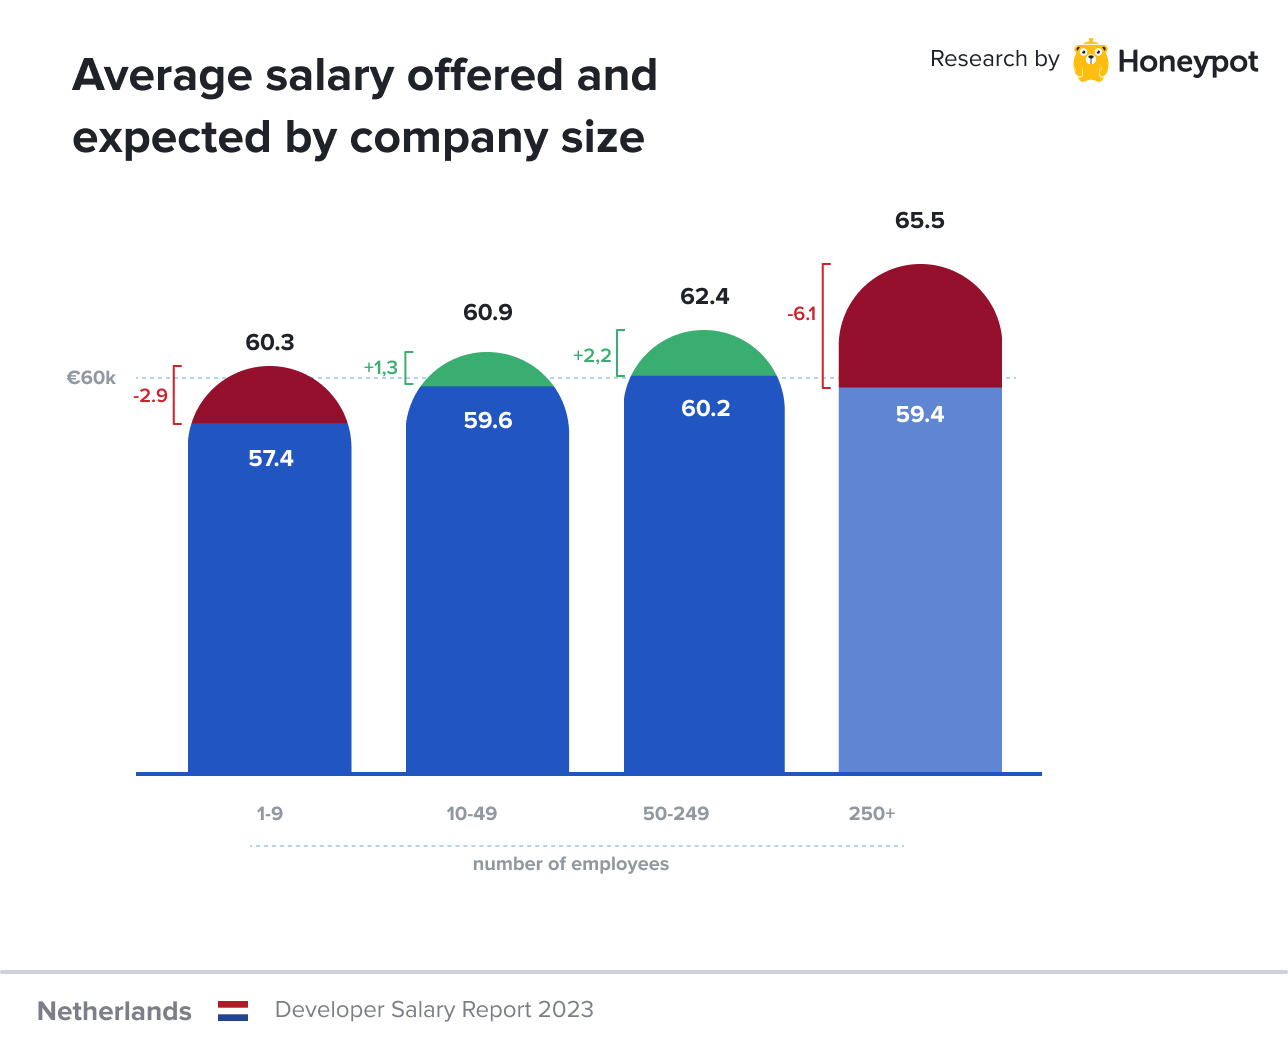 Graph showing average offered and expected developer salary per company size in the Netherlands